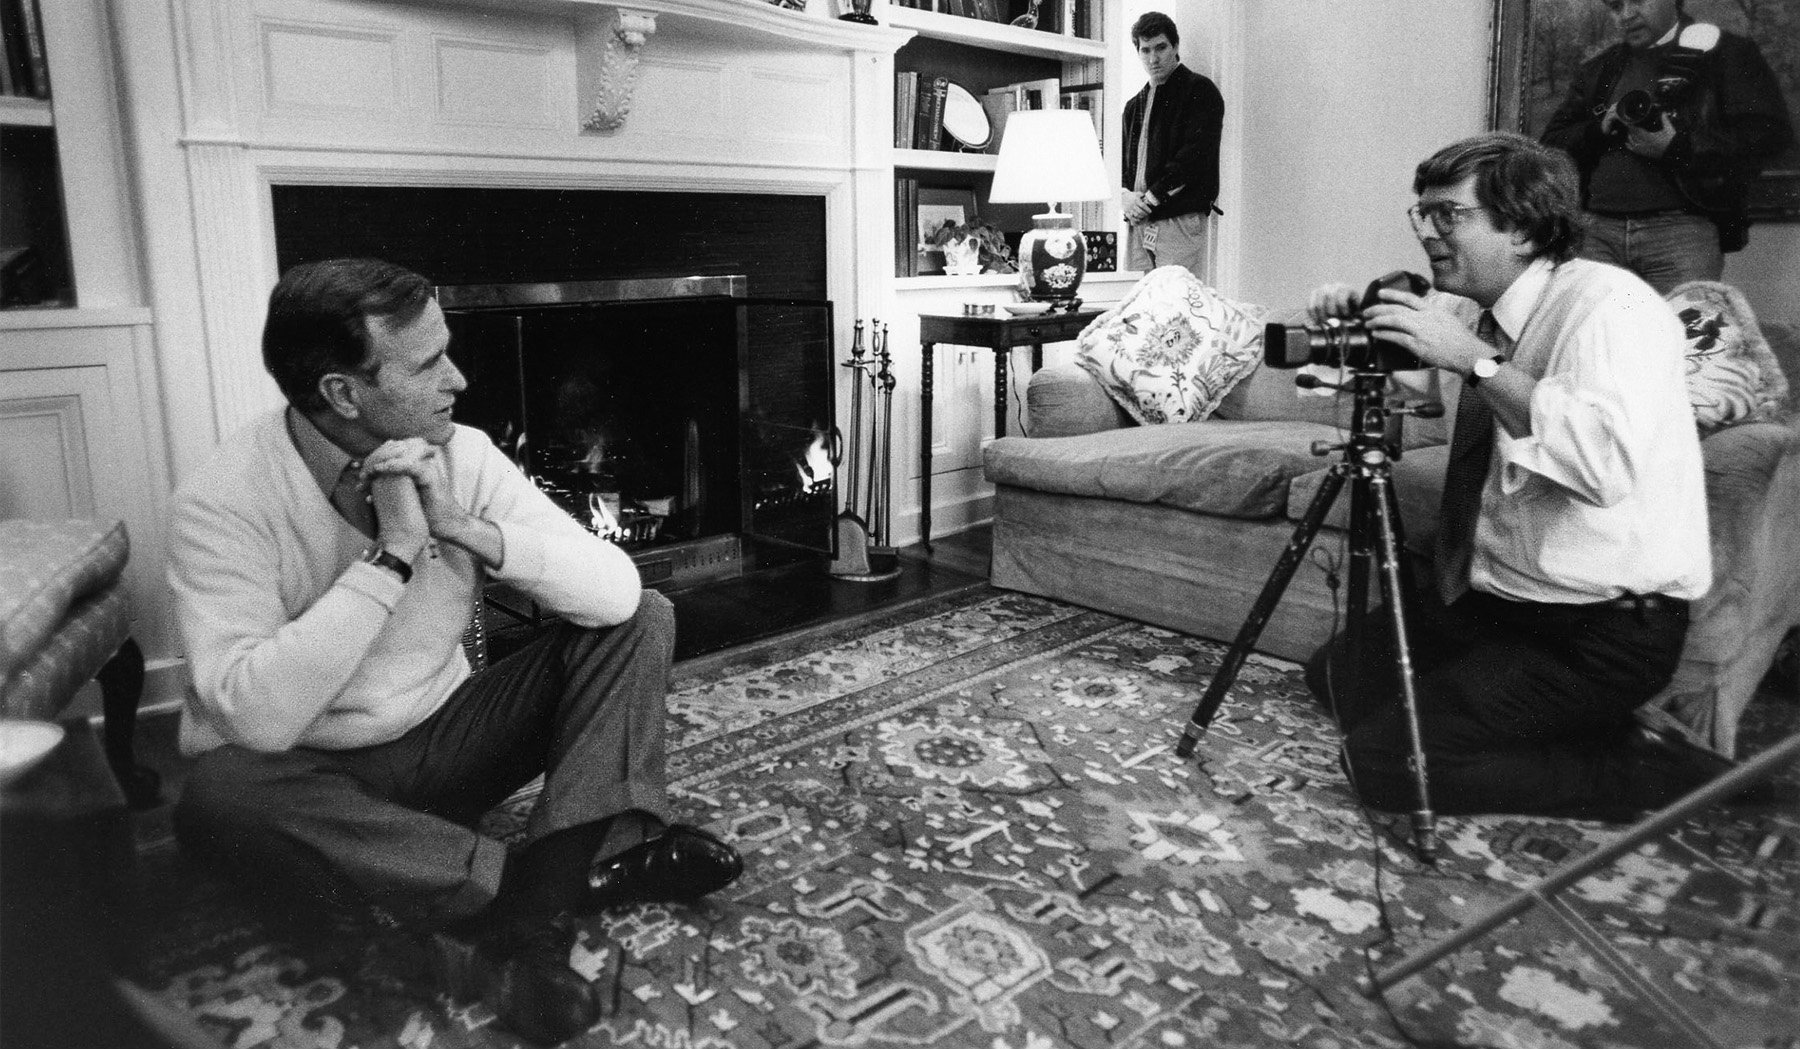  President George H.W. Bush and the photographer. The White House. 1989. © Christopher Little 